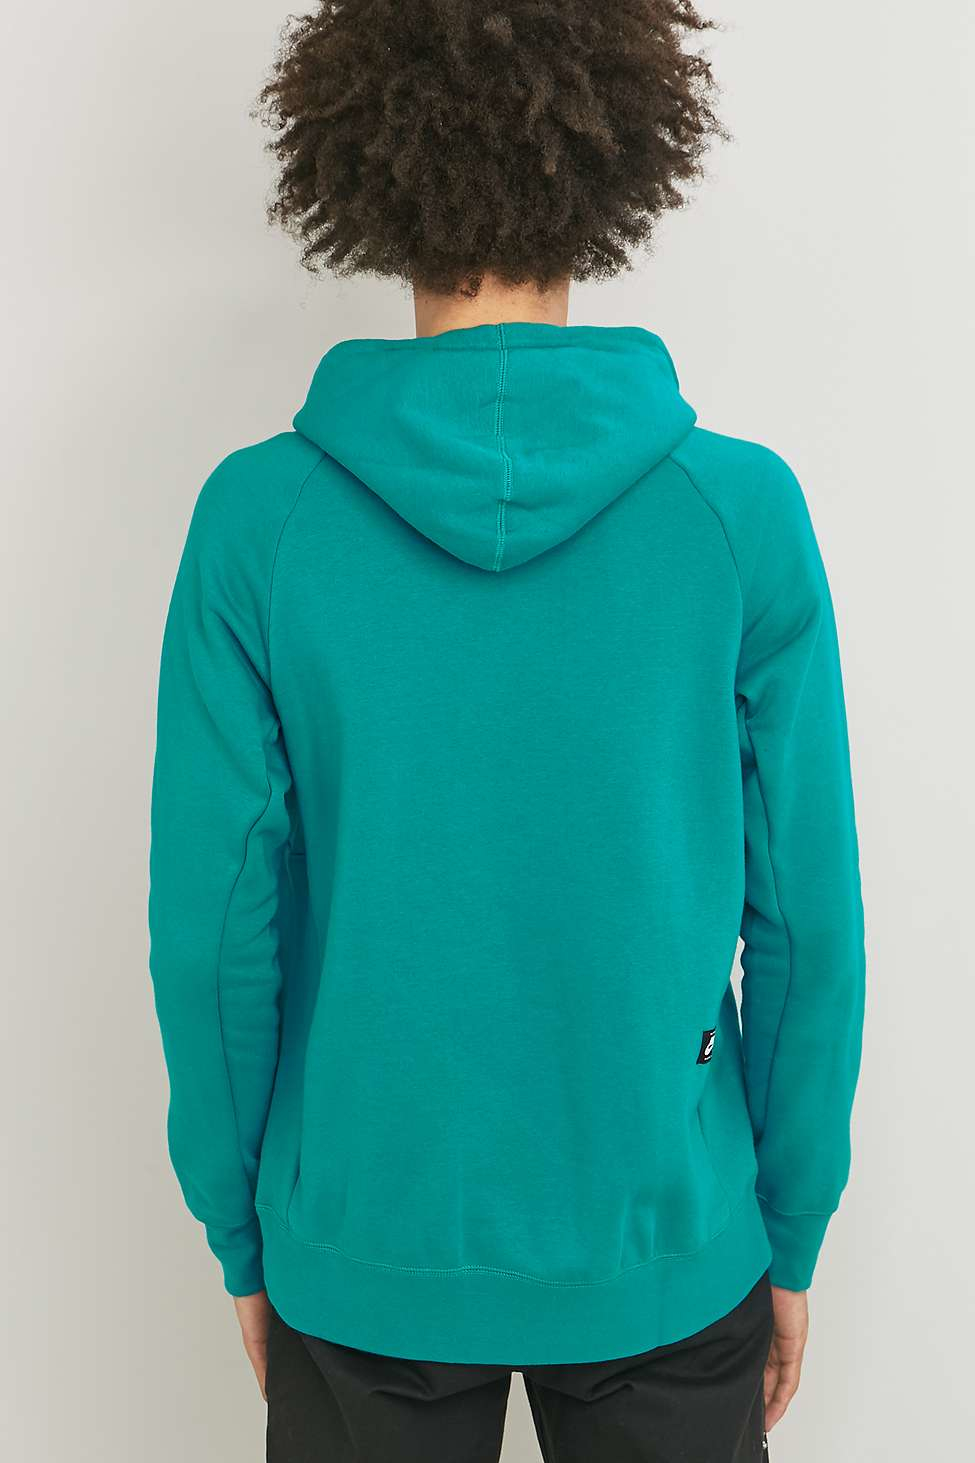 Nike Sb Icon Dots Teal Hoodie for Men - Lyst